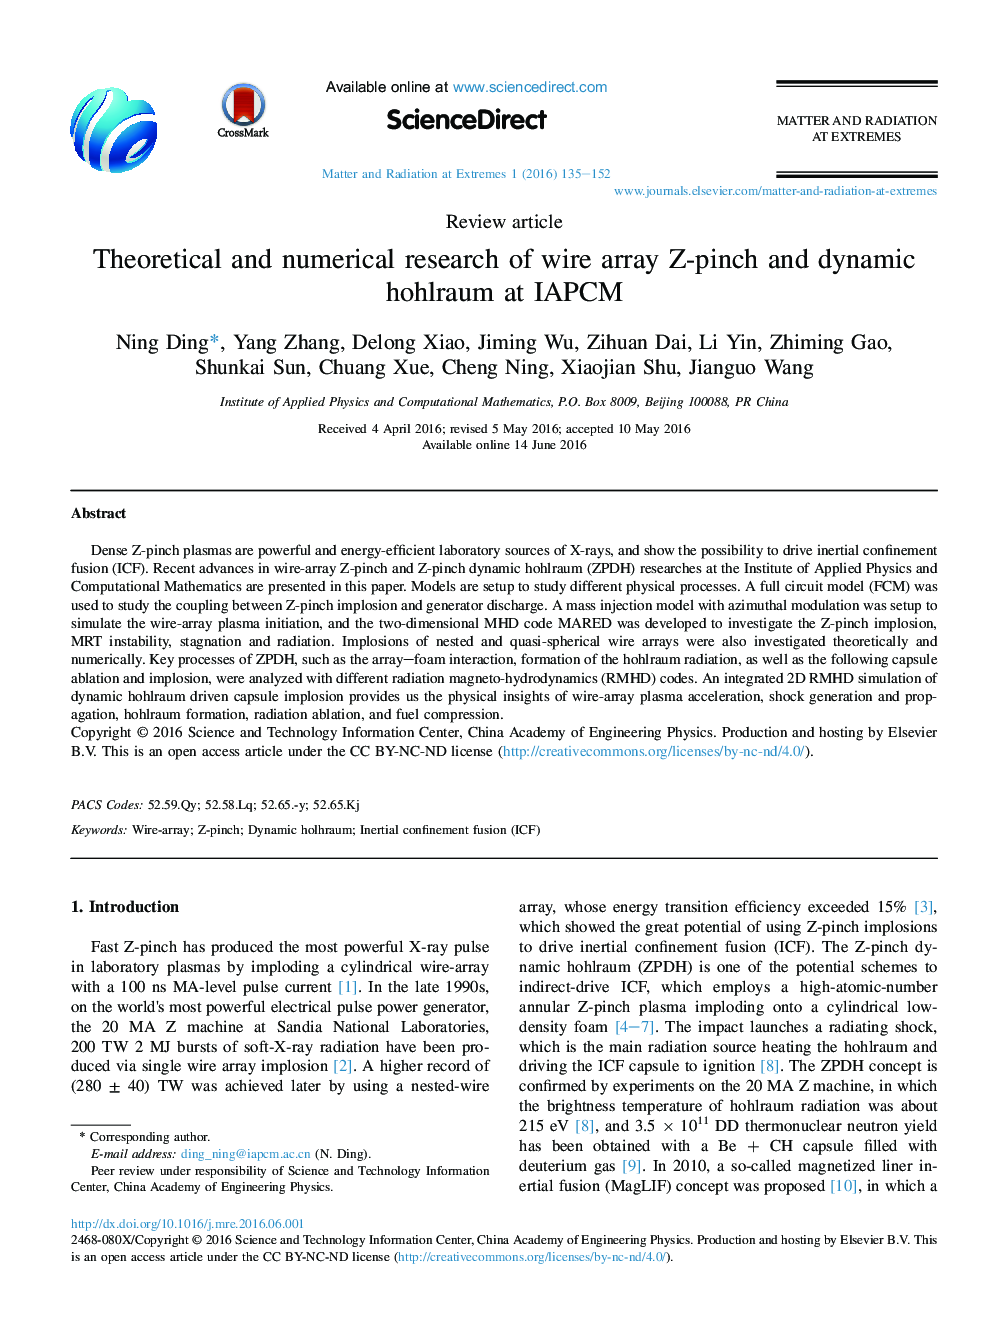 Theoretical and numerical research of wire array Z-pinch and dynamic hohlraum at IAPCM 